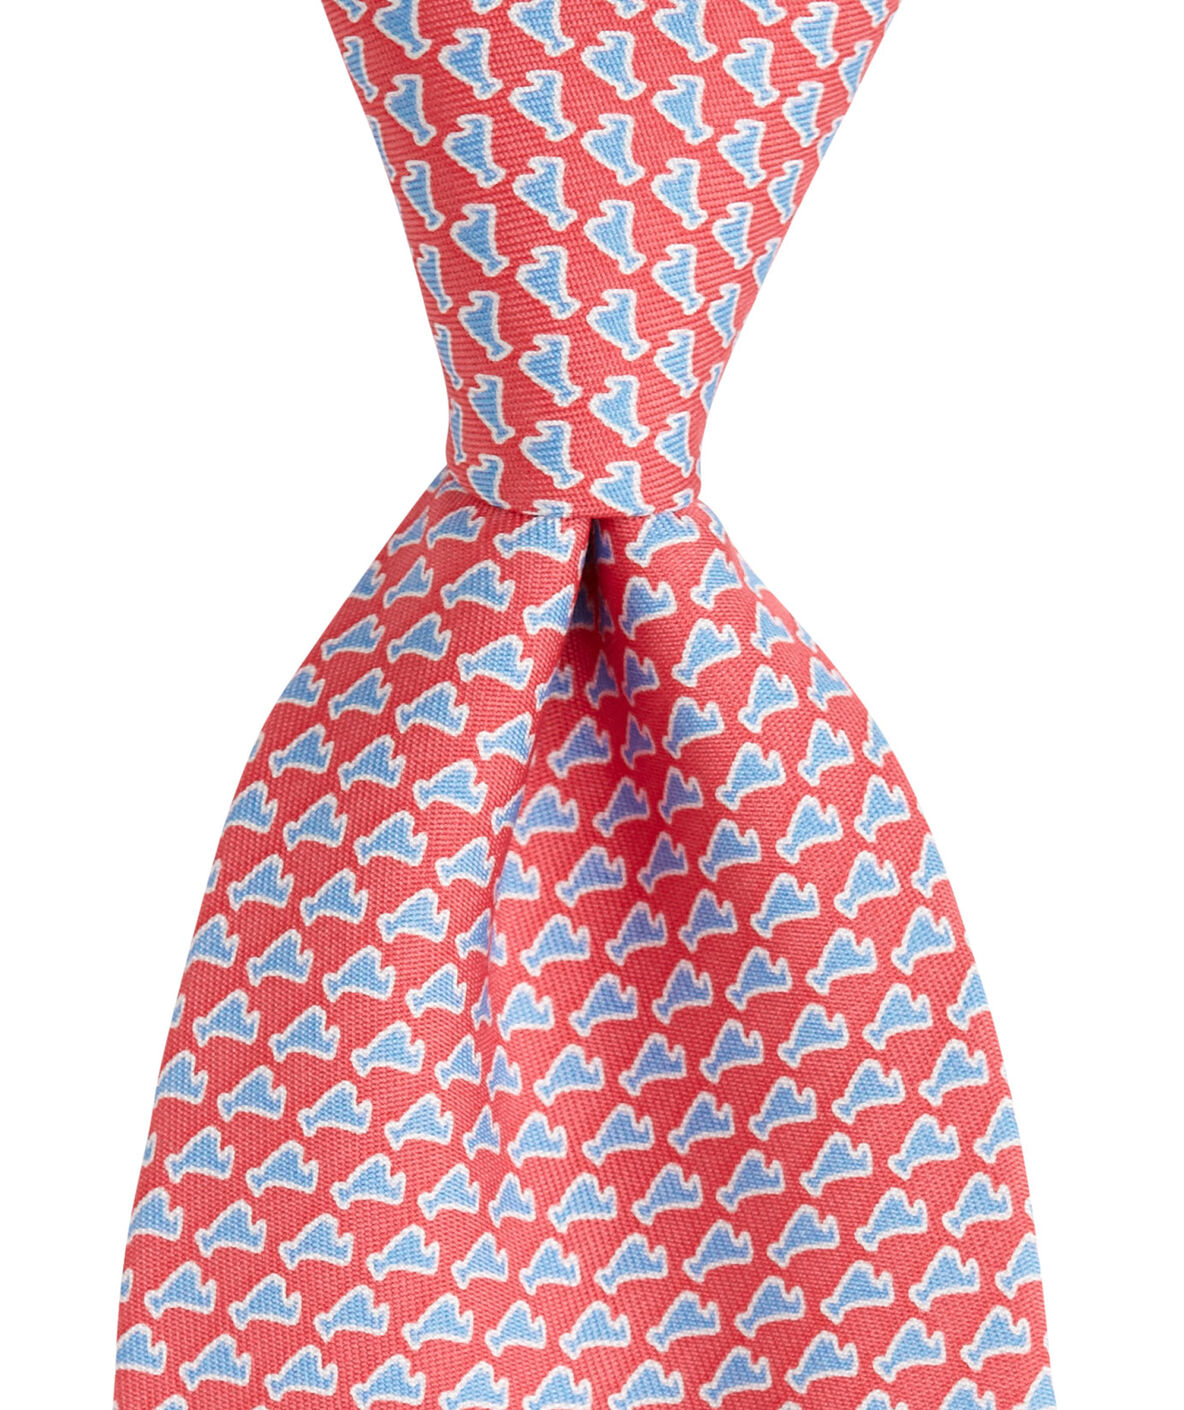 Vineyard Vines Tie - Truck & Tree - Red (Extra Long) - Men's Clothing,  Traditional Natural shouldered clothing, preppy apparel